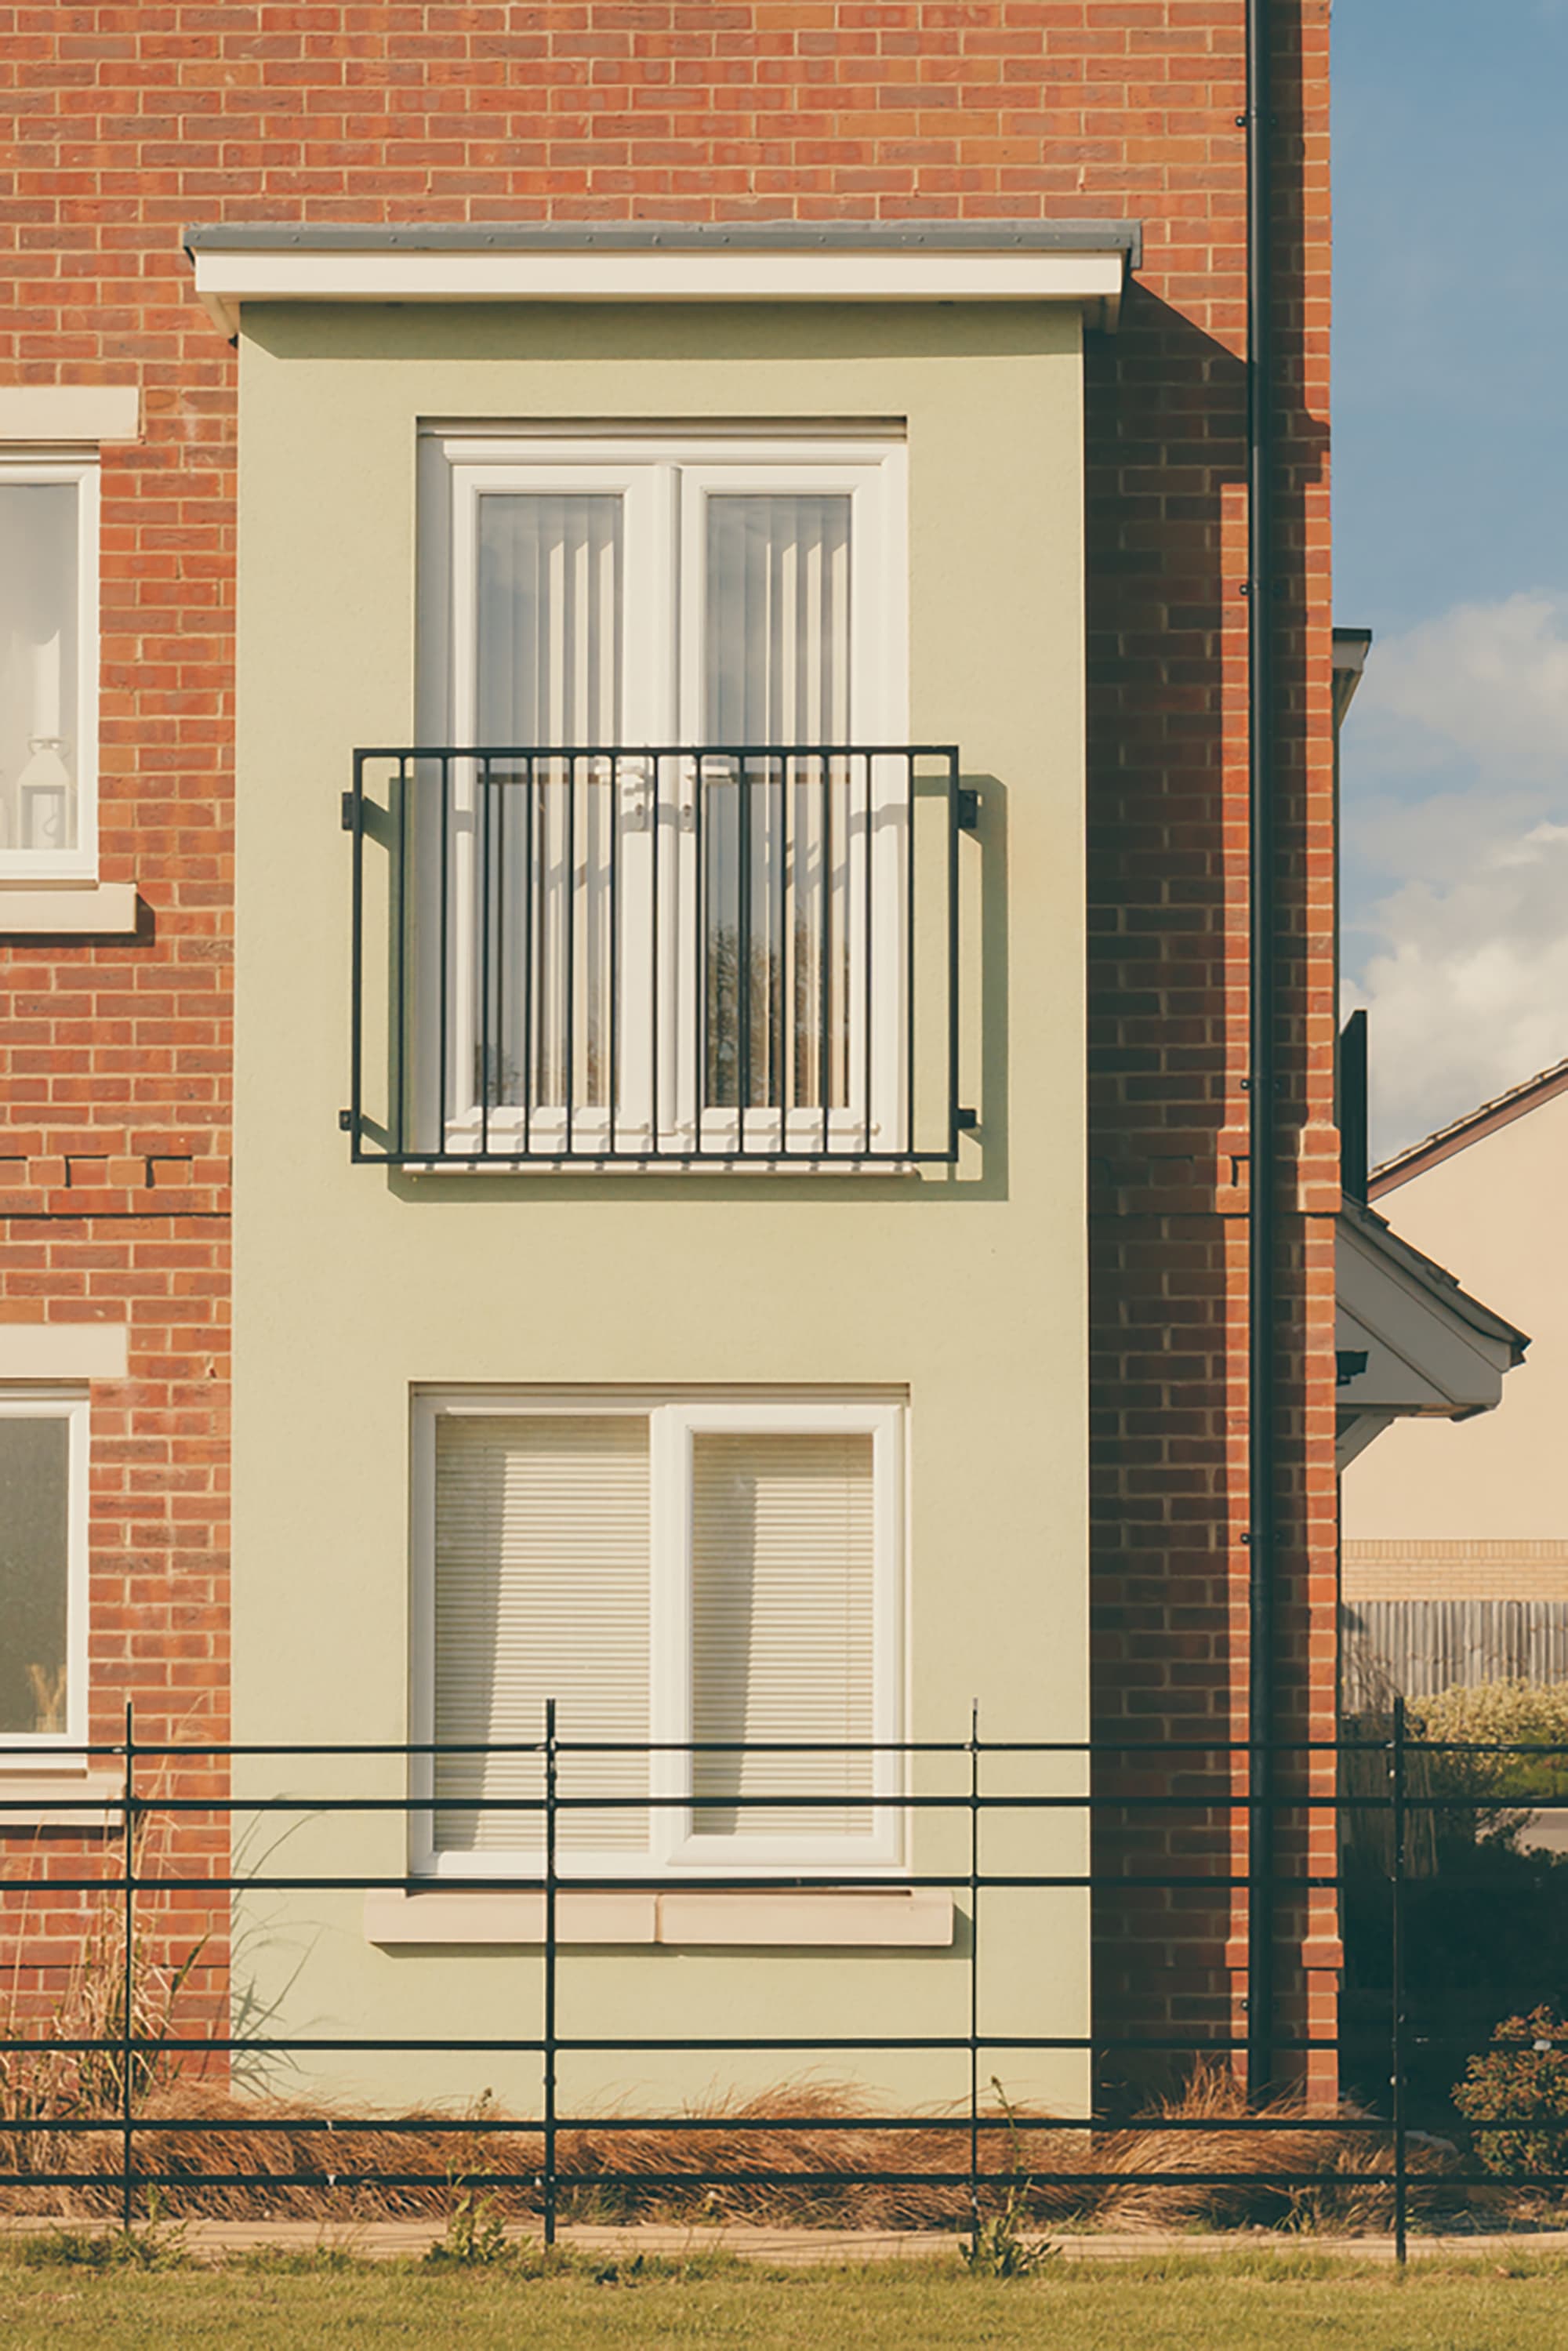 Balconette - What's the best Juliet Balcony for your project? Find out more  about Balconette's range of Juliet Balconies to transform your bedroom or  upstairs living room areas. 👉